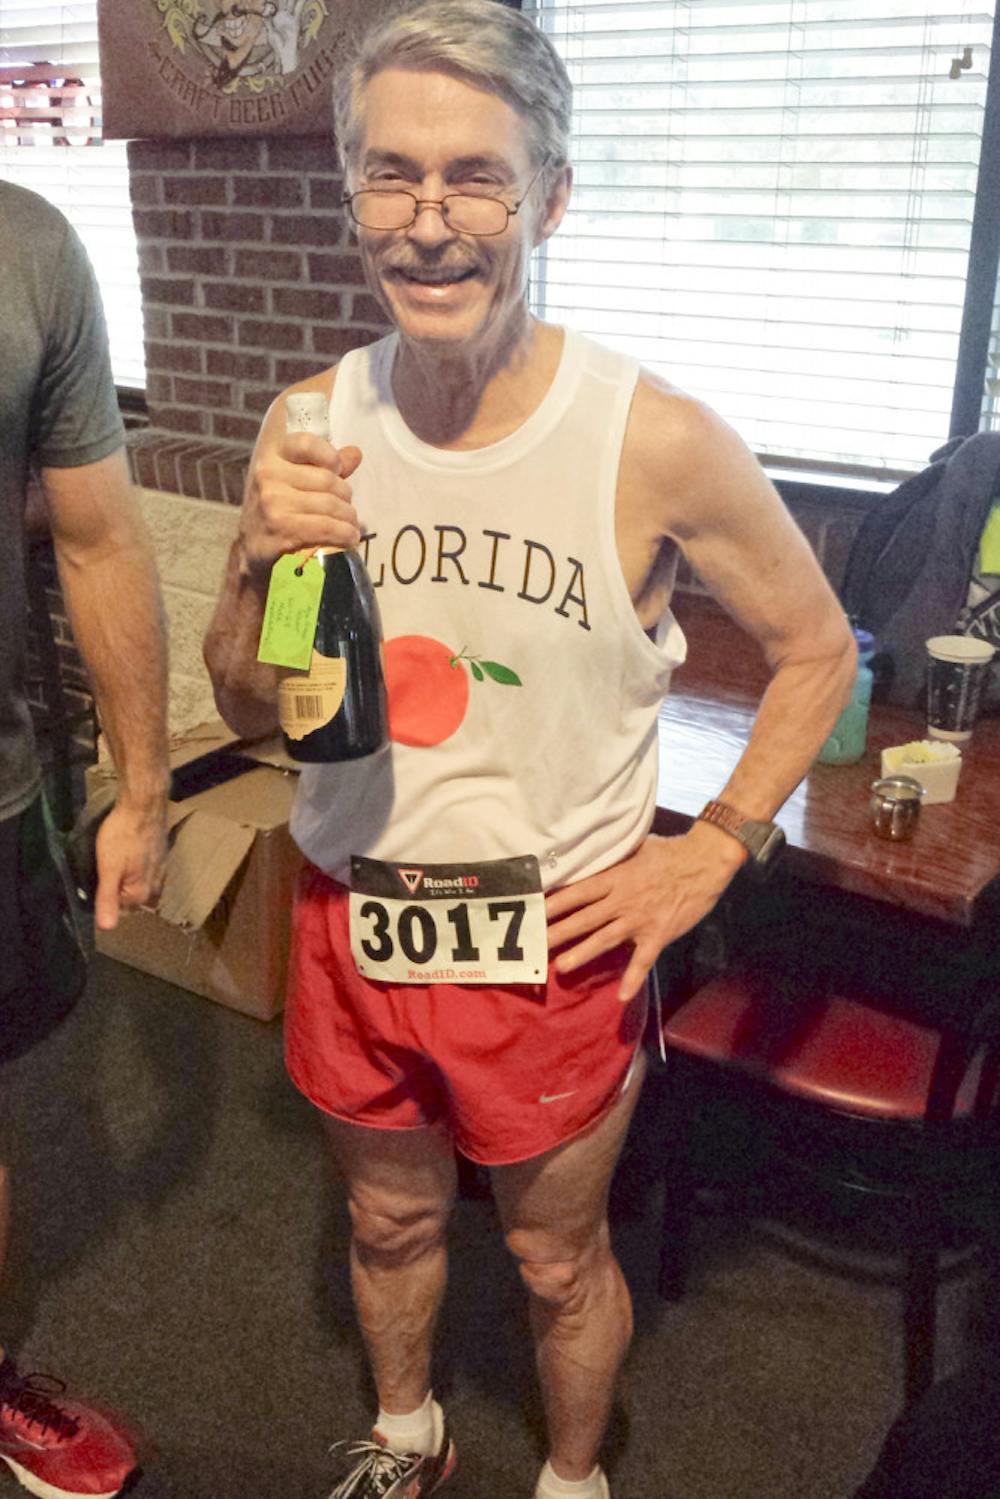 <p>An accomplished runner who often dominated the competition in his age group, UF physics professor Steven Detweiler poses for a picture on New Year's Day after the Shorter Mile race in Gainesville,. Detweiler was 68 when he passed away.</p>